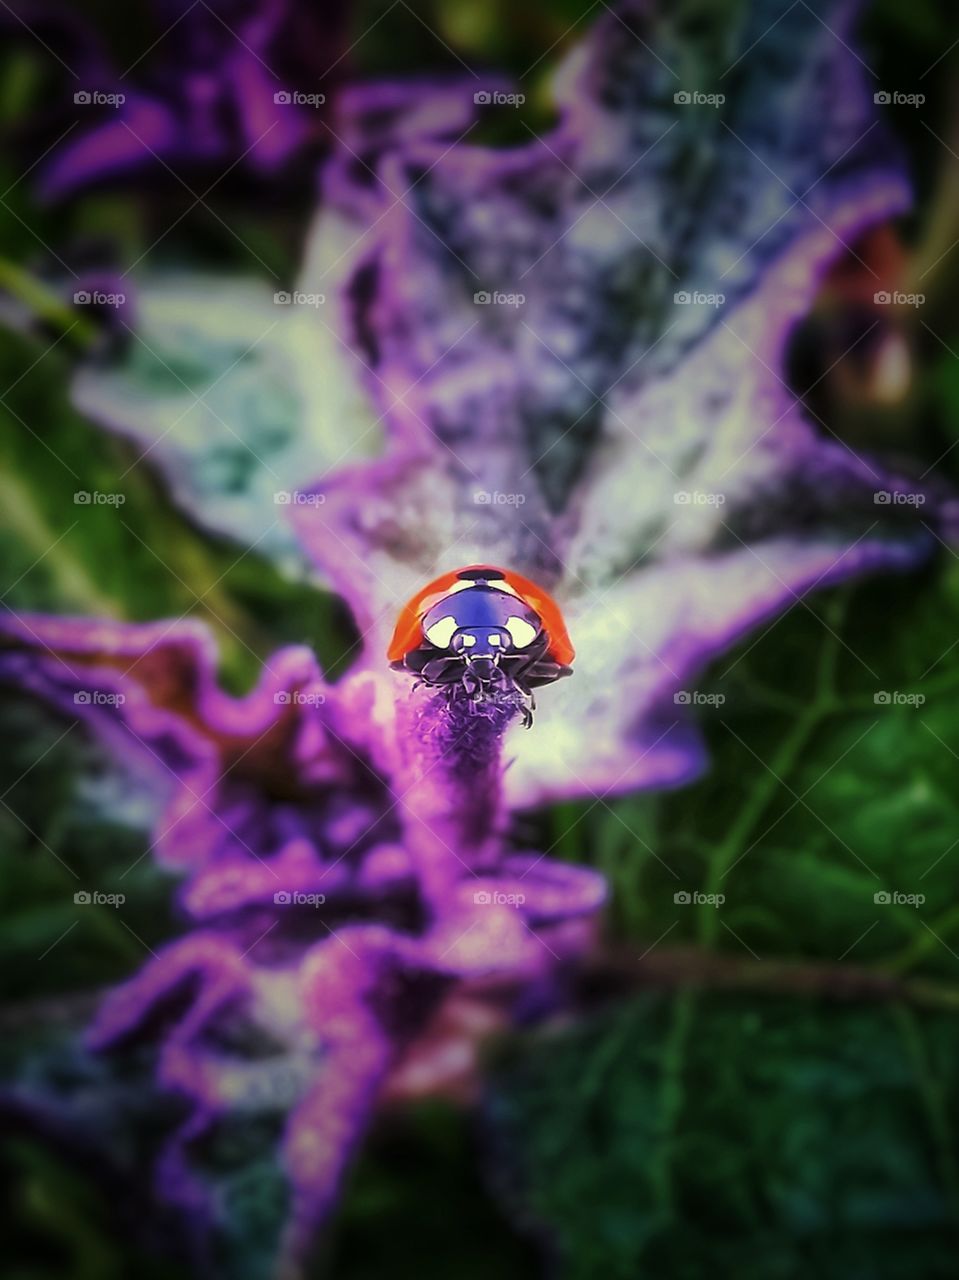 Ladybug on a green and purple weed glorious mother nature